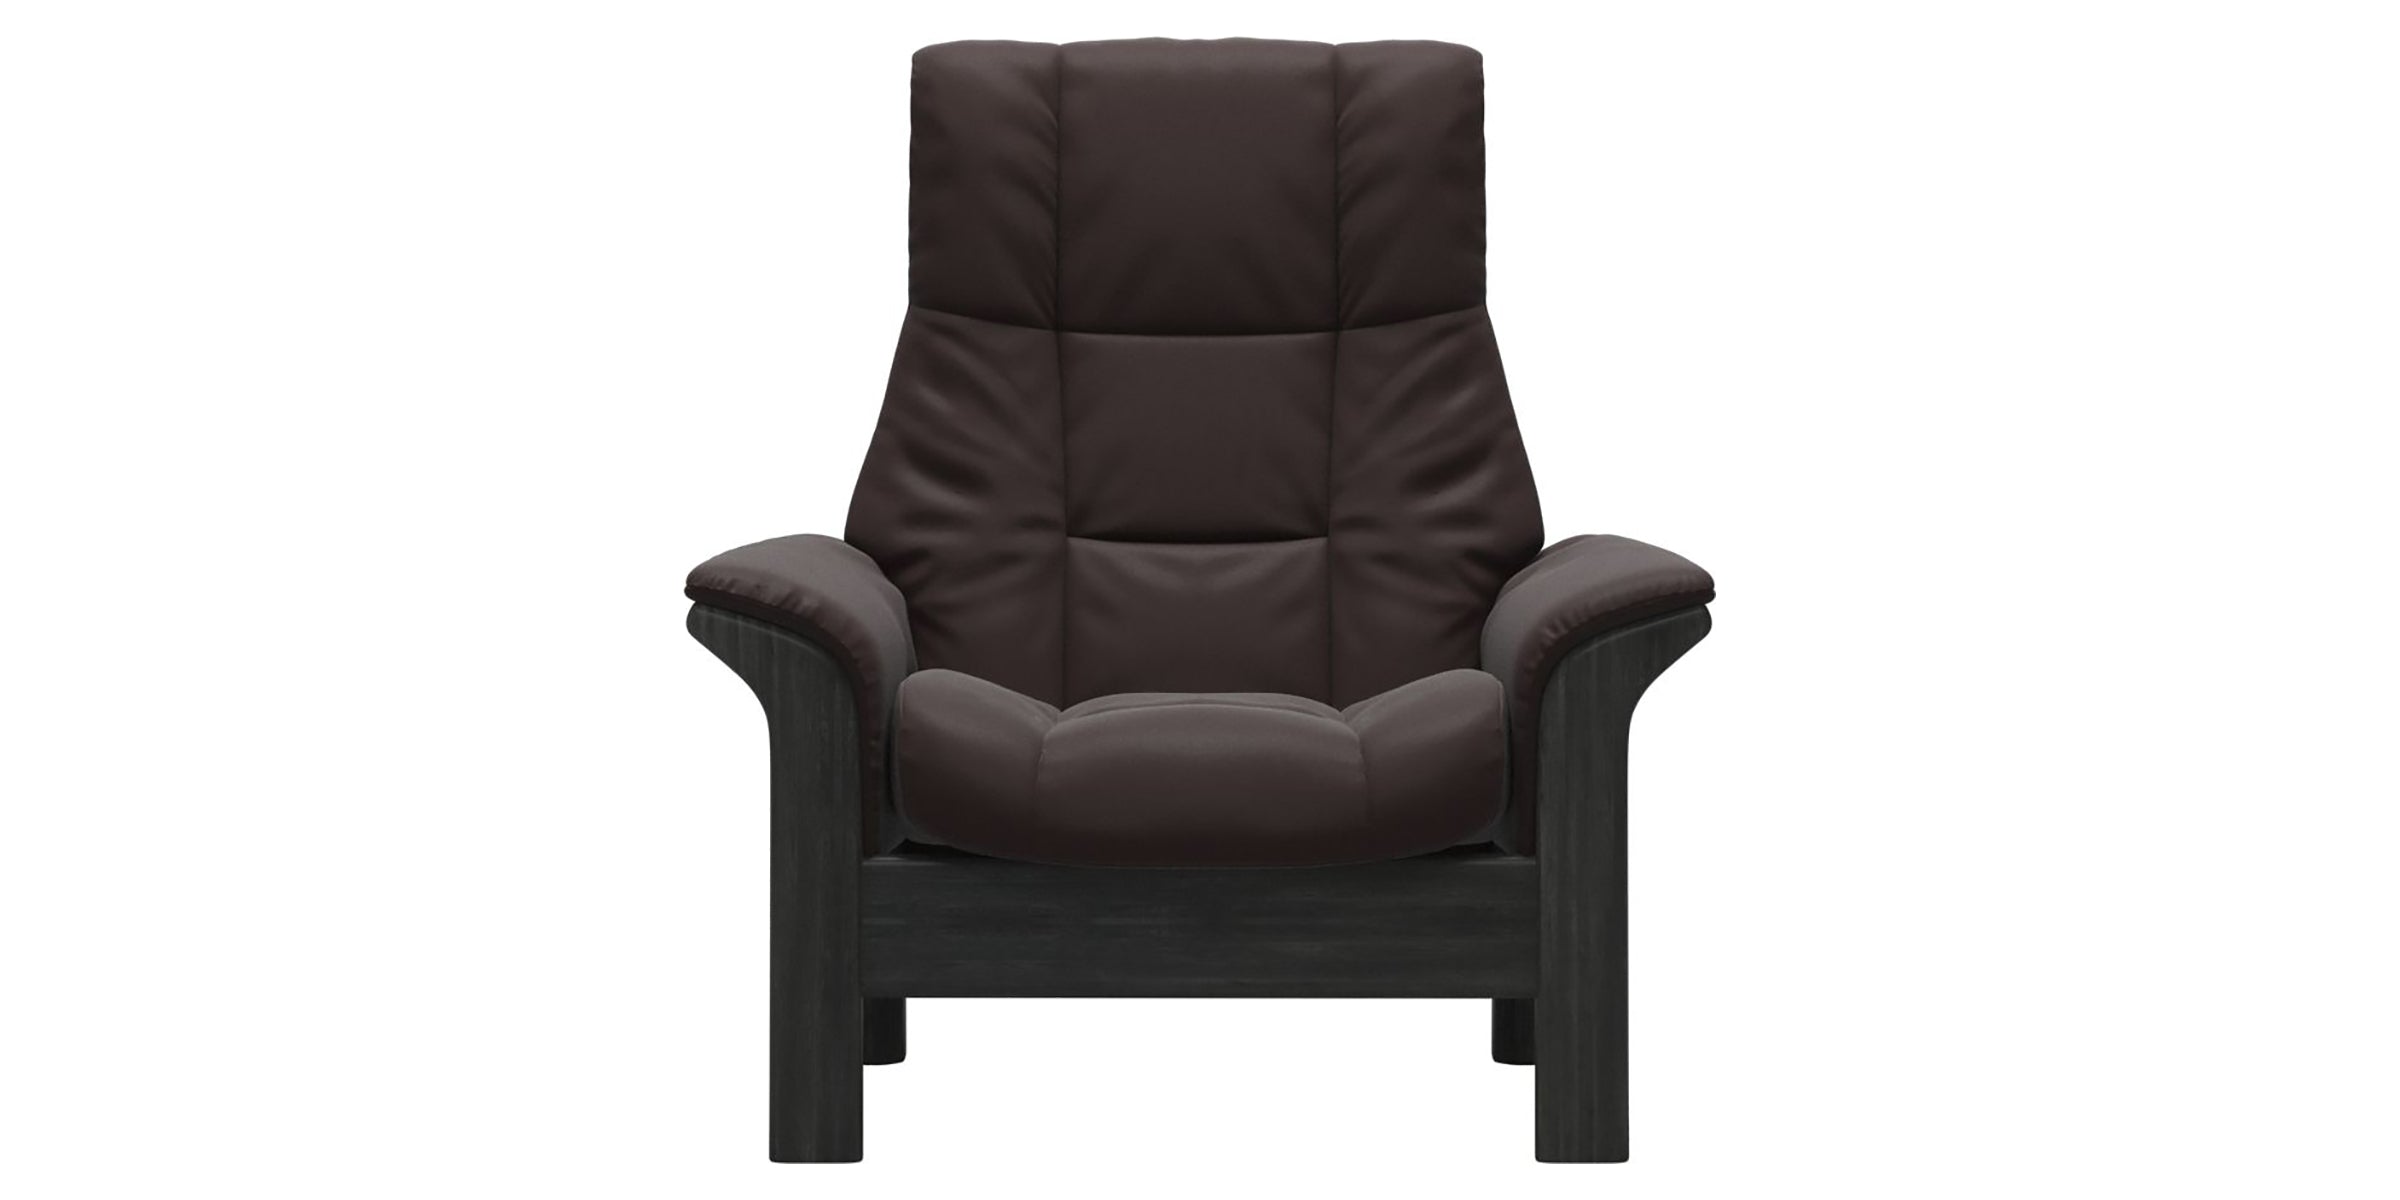 Paloma Leather Chocolate and Grey Base | Stressless Windsor High Back Chair | Valley Ridge Furniture